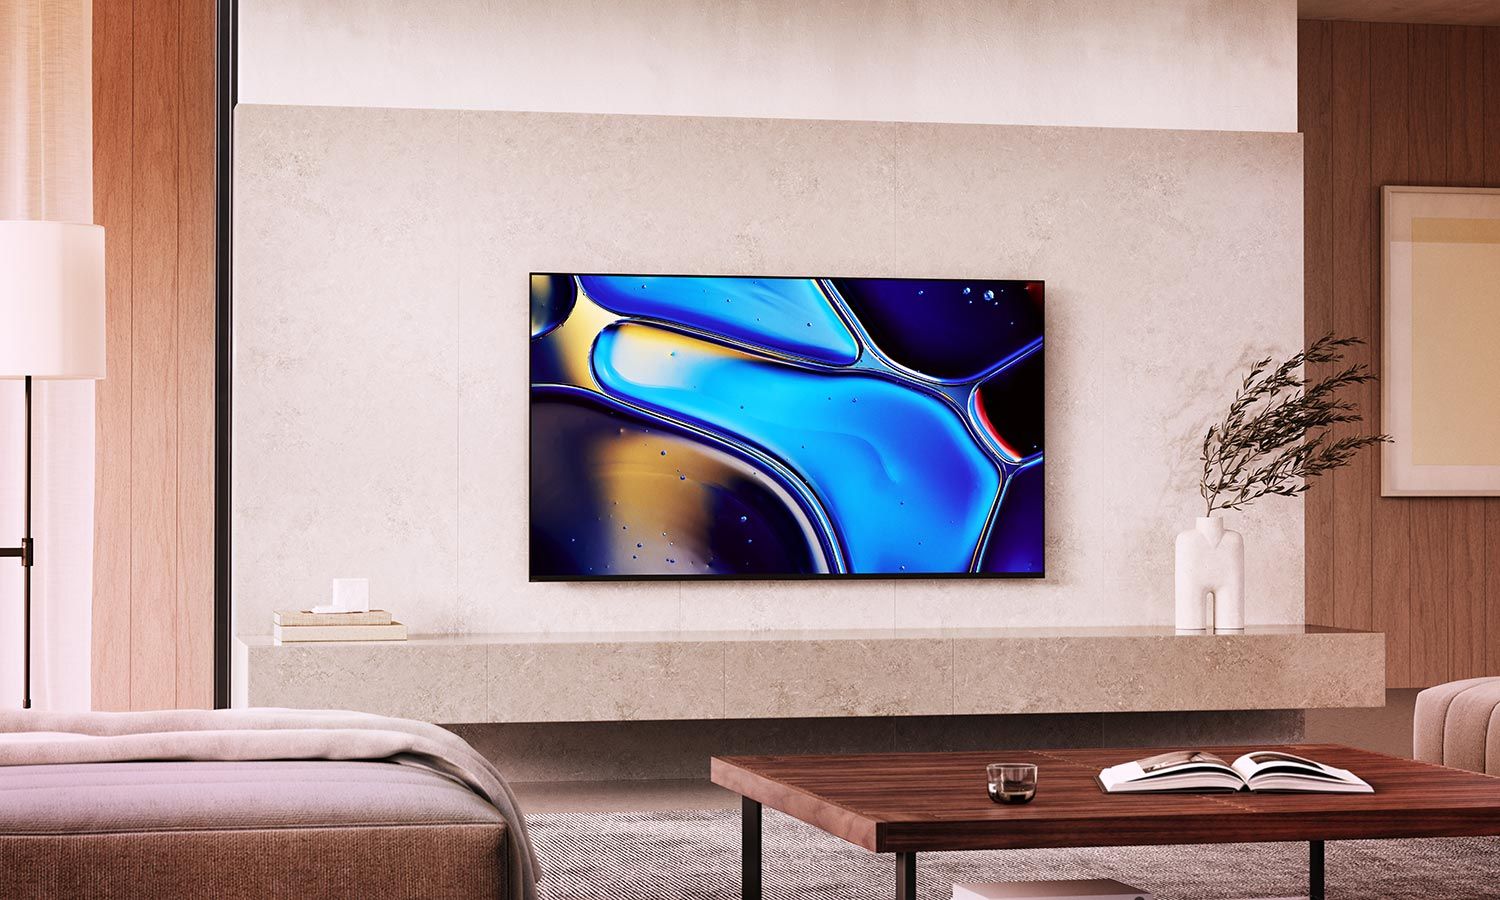 A flat-screen TV mounted on a light-colored wall, displaying a colorful abstract image in a stylish living room with a minimalist design.